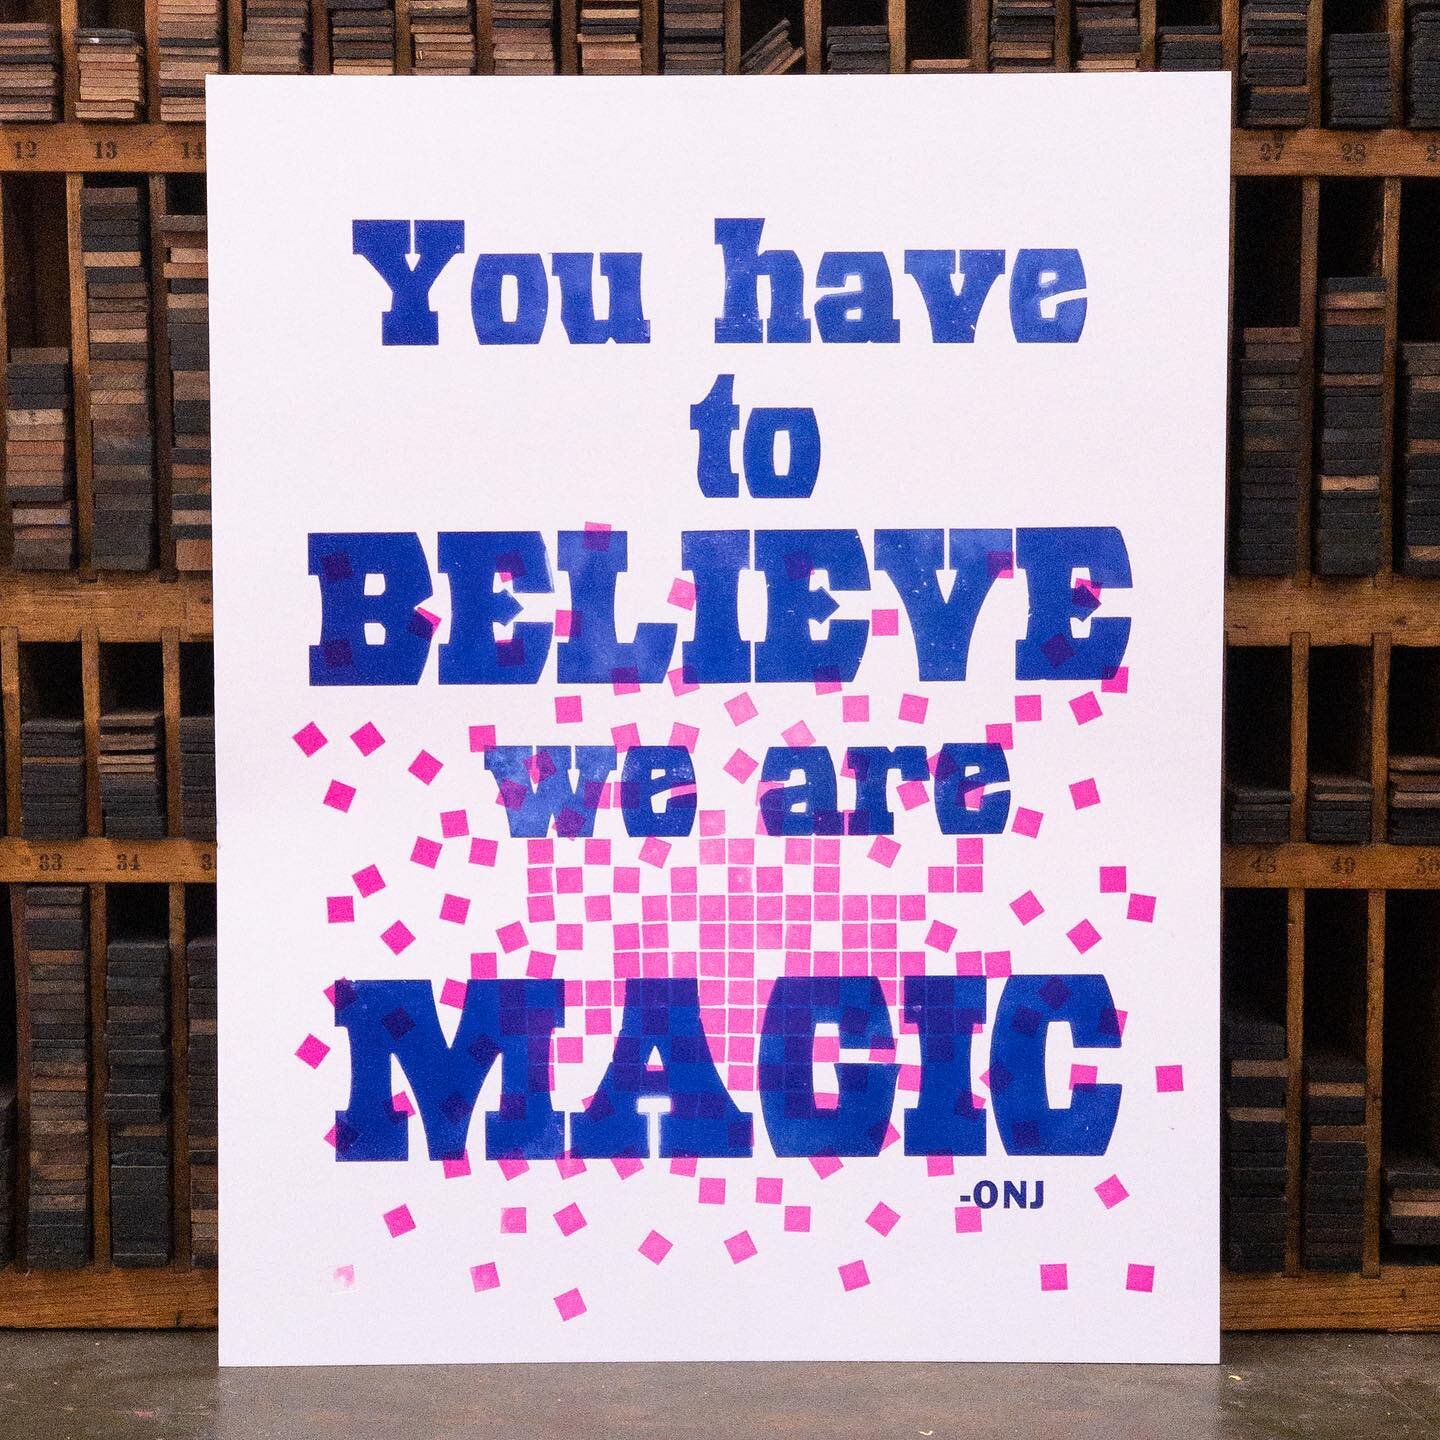 In the Fresh Prints Box:
&ldquo;You have to BELIEVE we are MAGIC&rdquo; 
Letterpress printed in house at tonight&rsquo;s Pop-In!
. 
Want one?? Please come by to pick one up from the Fresh Prints box while they last. These are free to the public and w